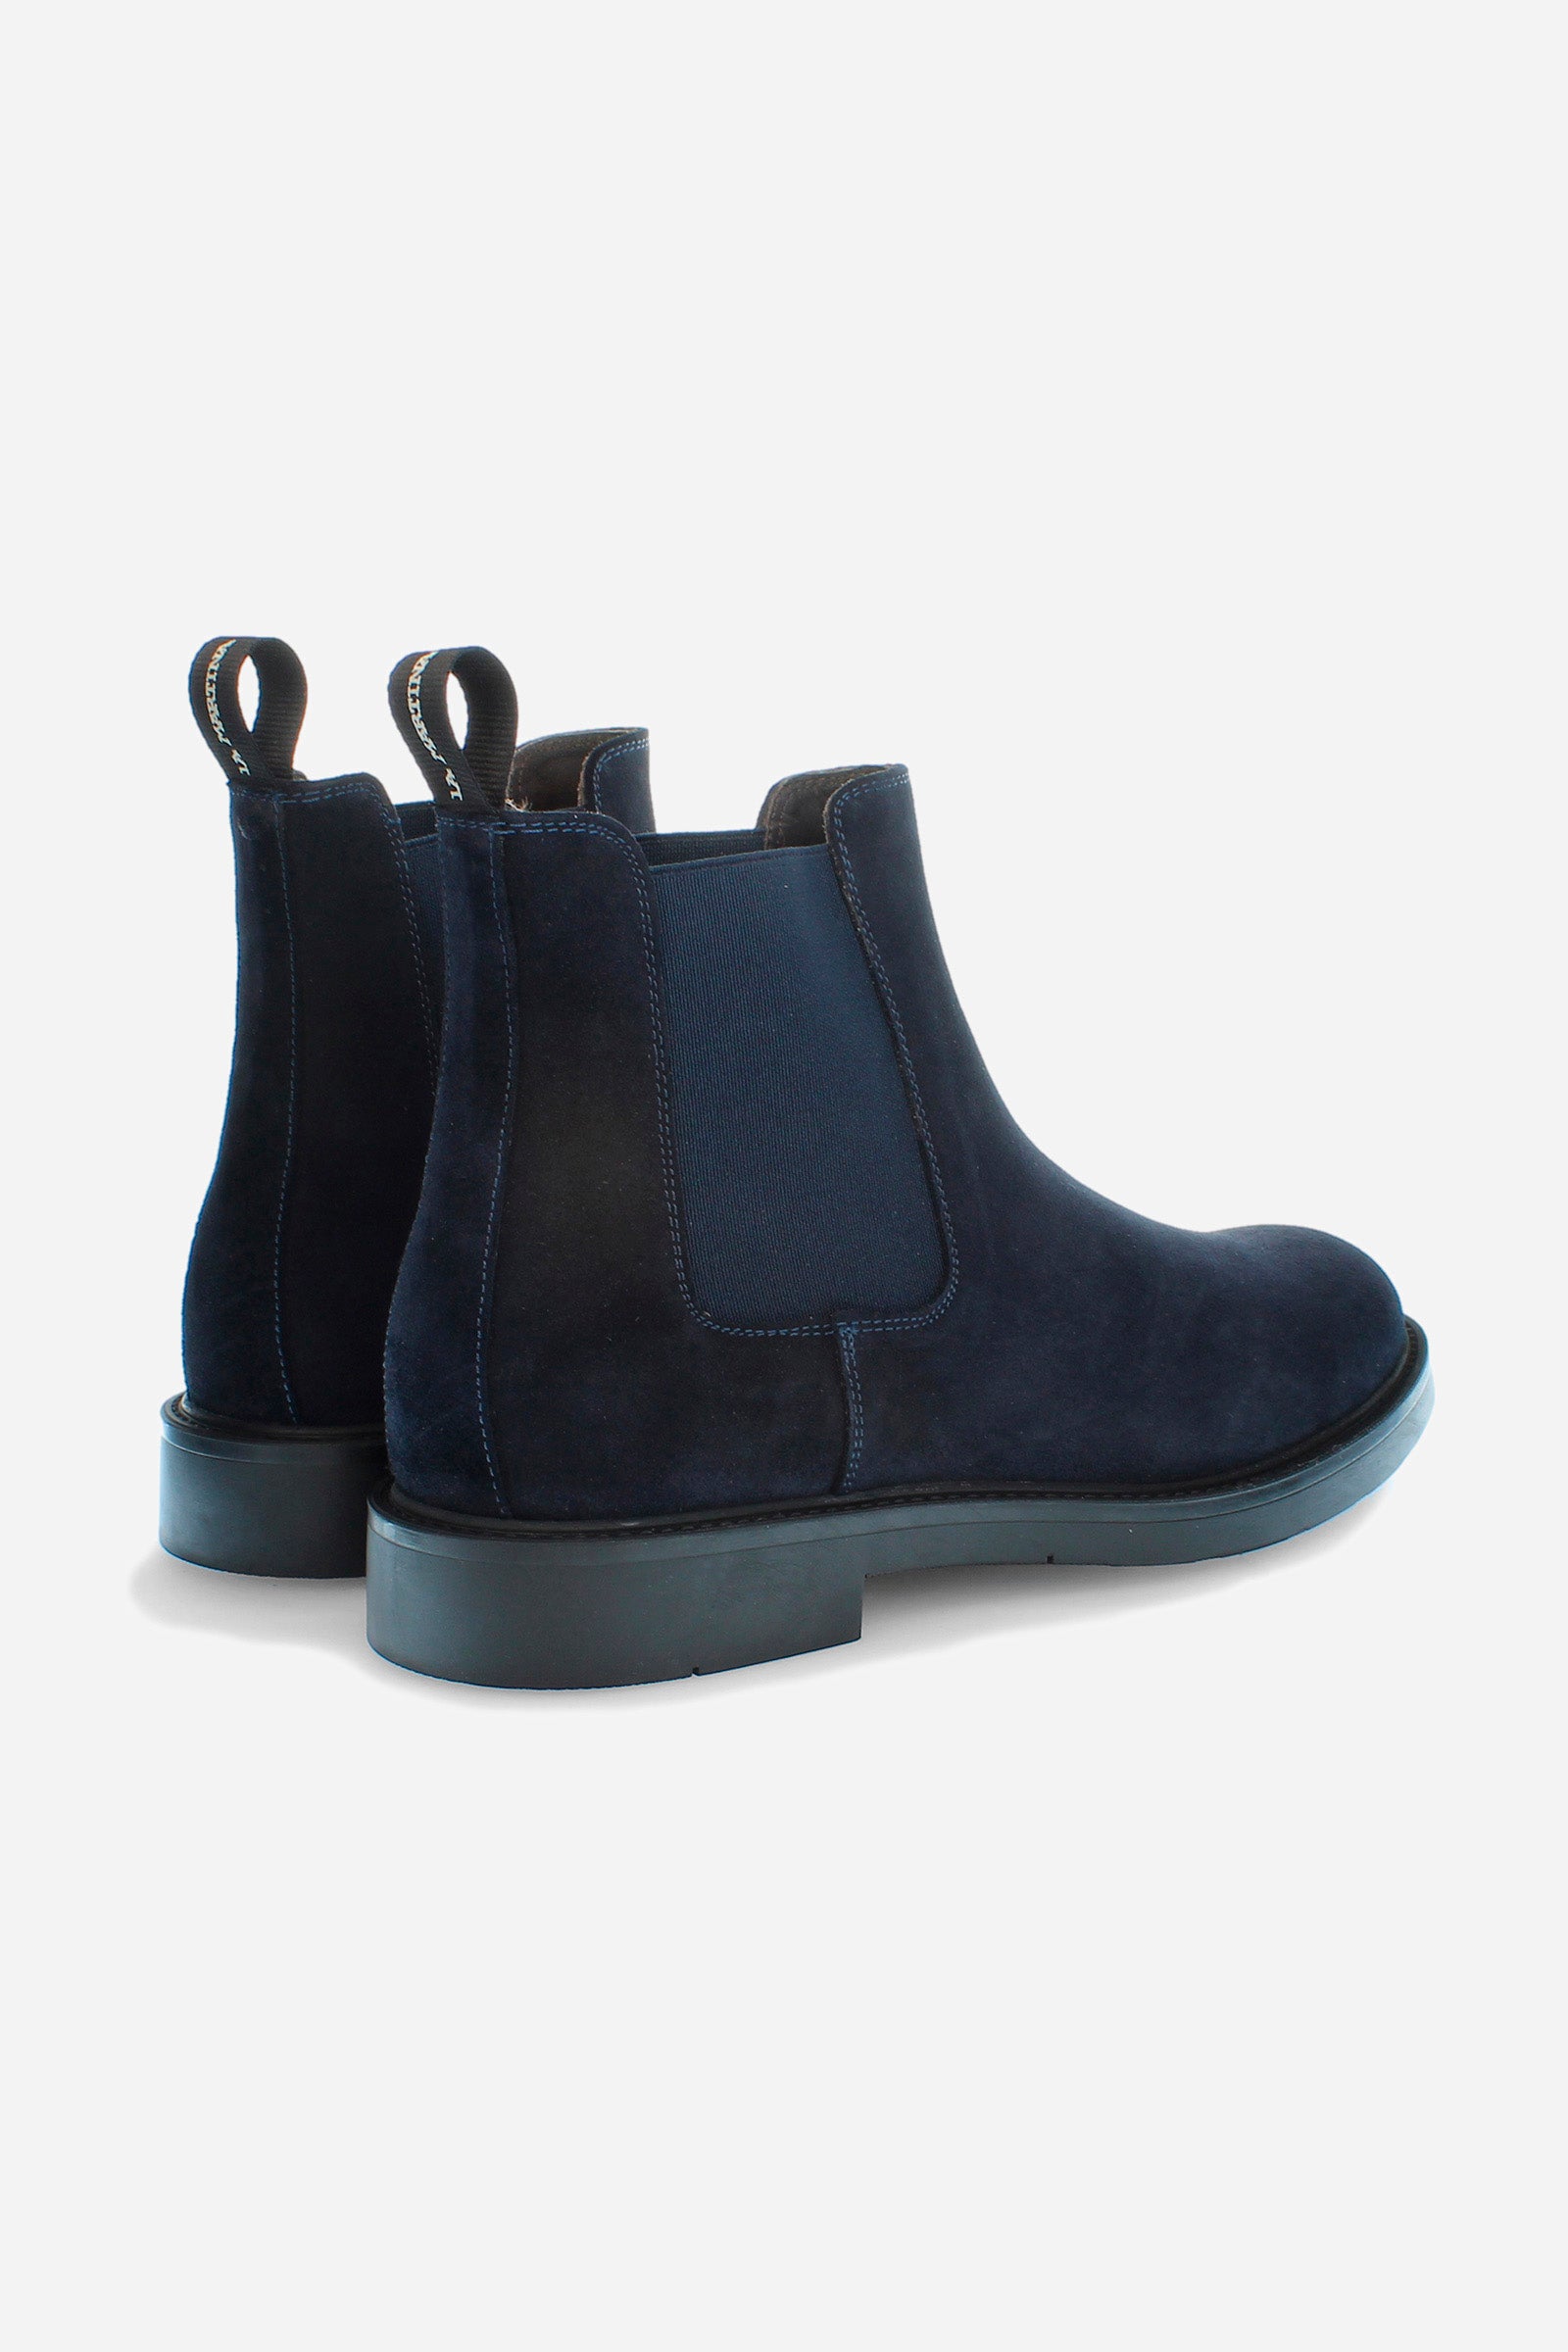 Men’s ankle boot in suede